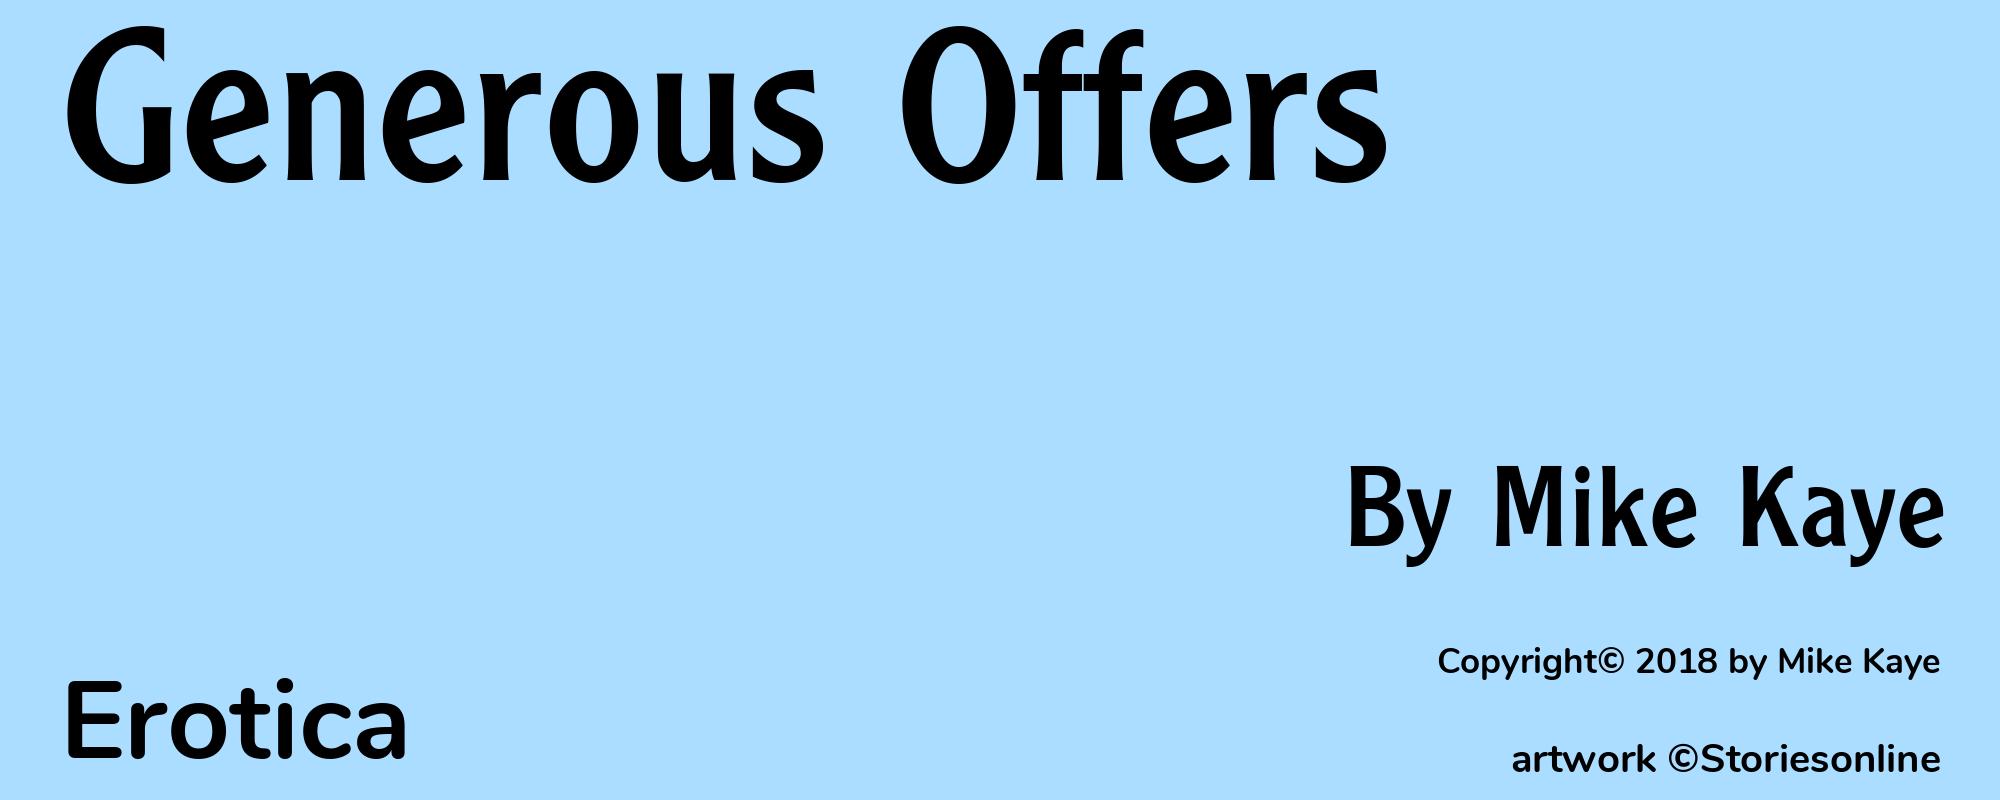 Generous Offers - Cover